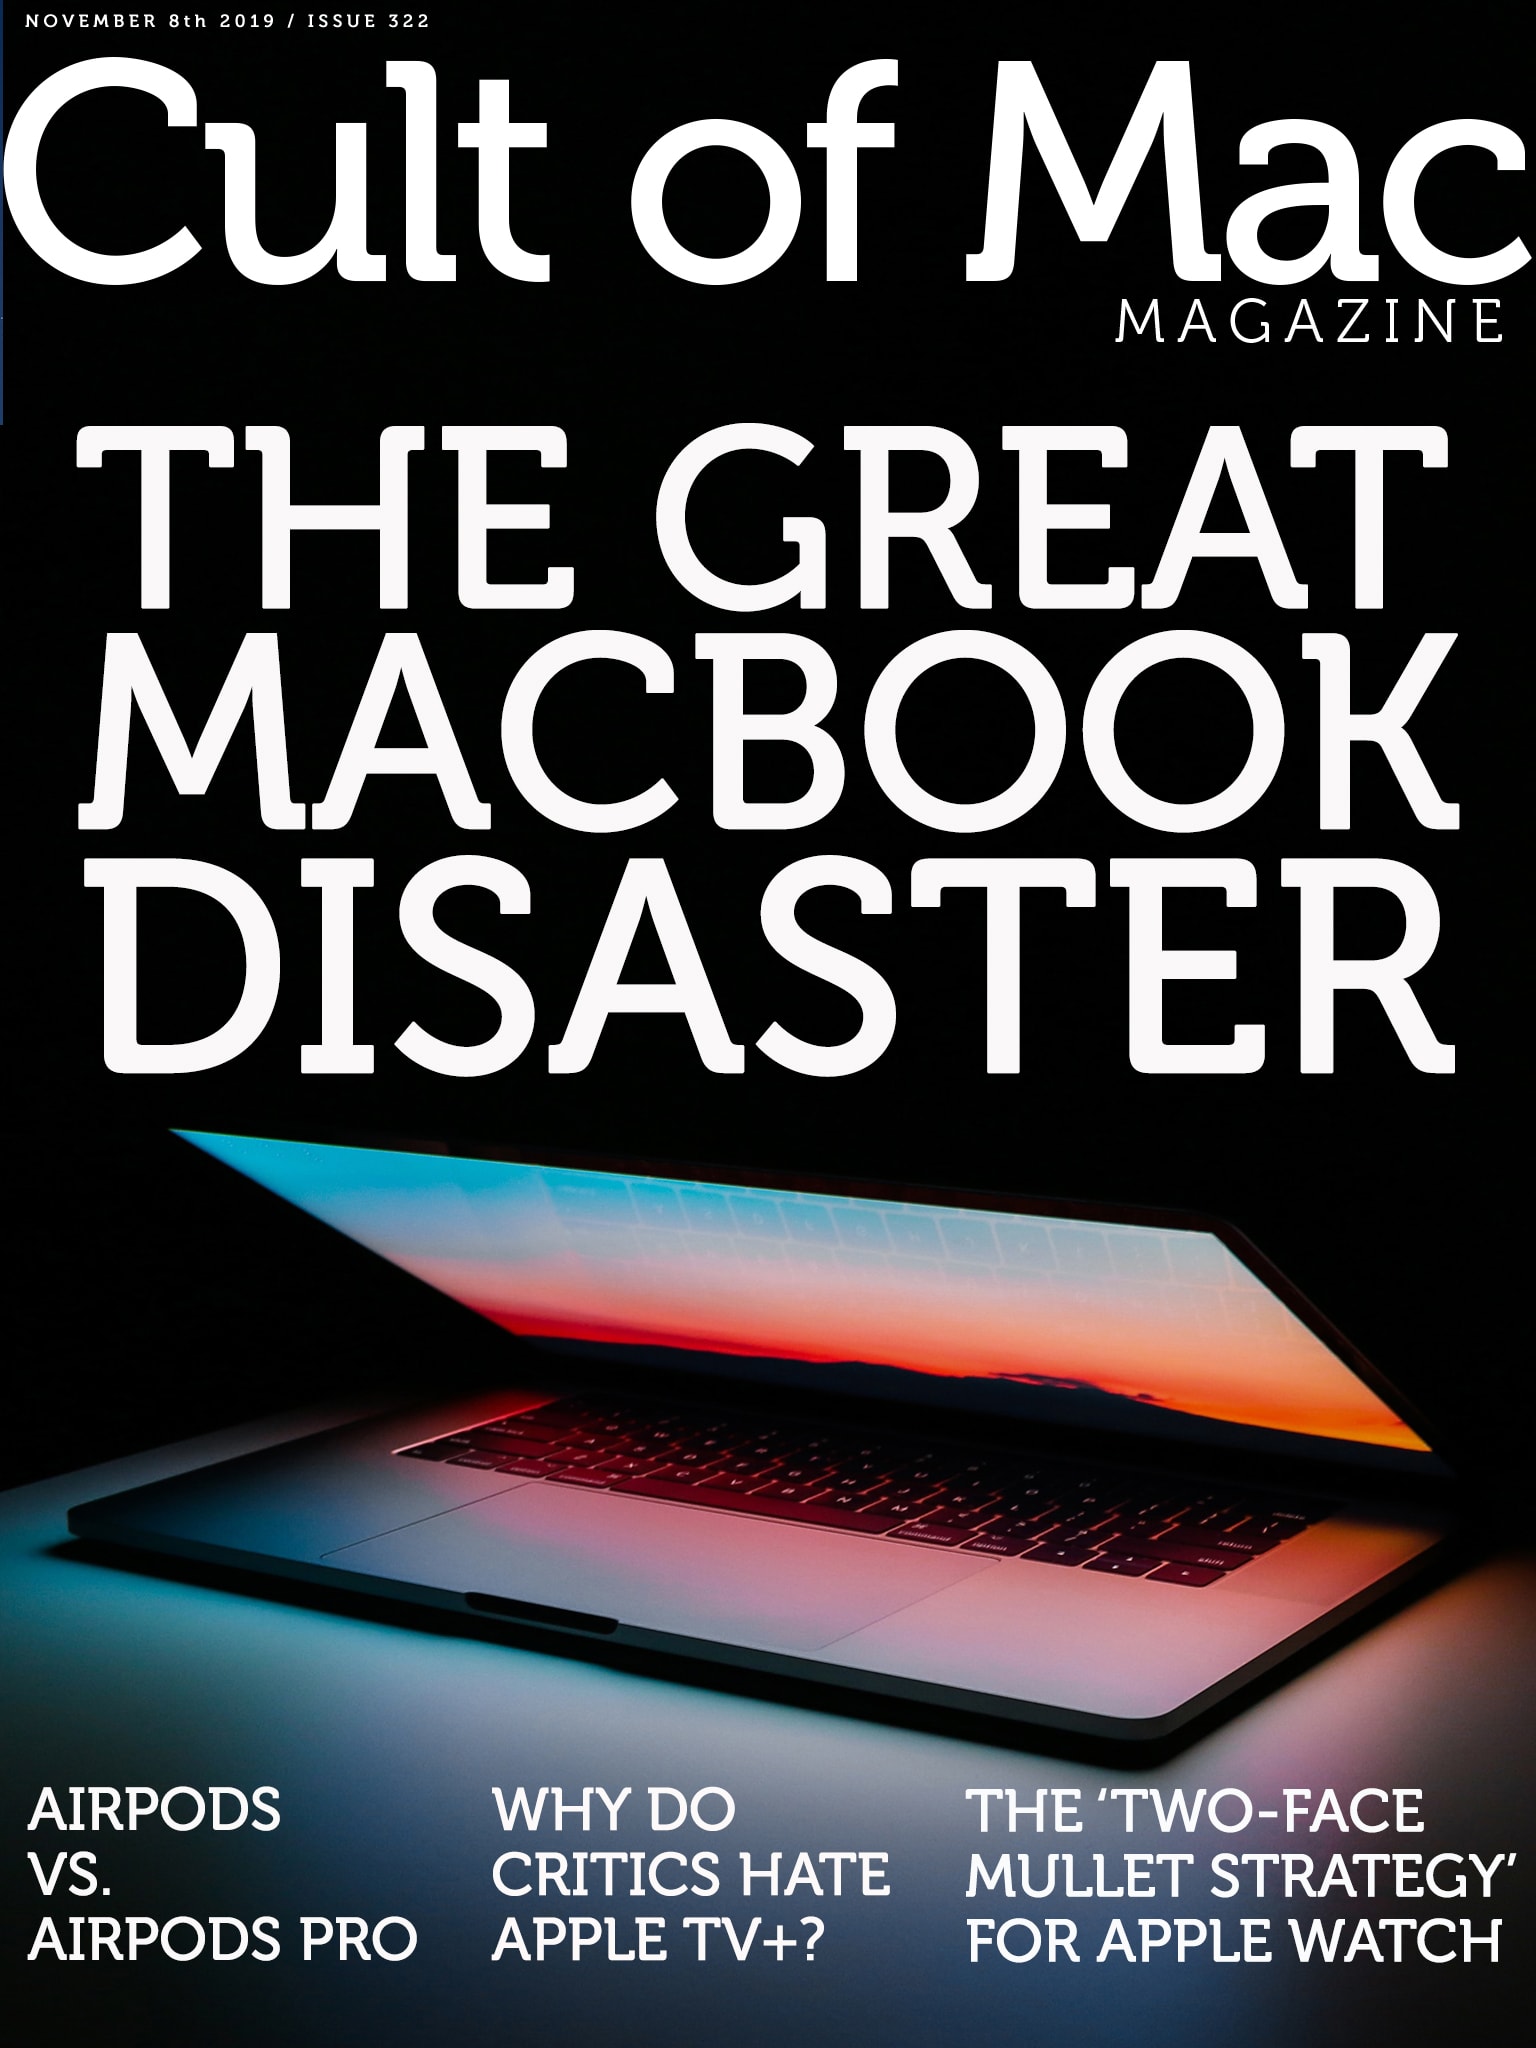 MacBook disaster: Can Cupertino fix this sorry state of affairs?